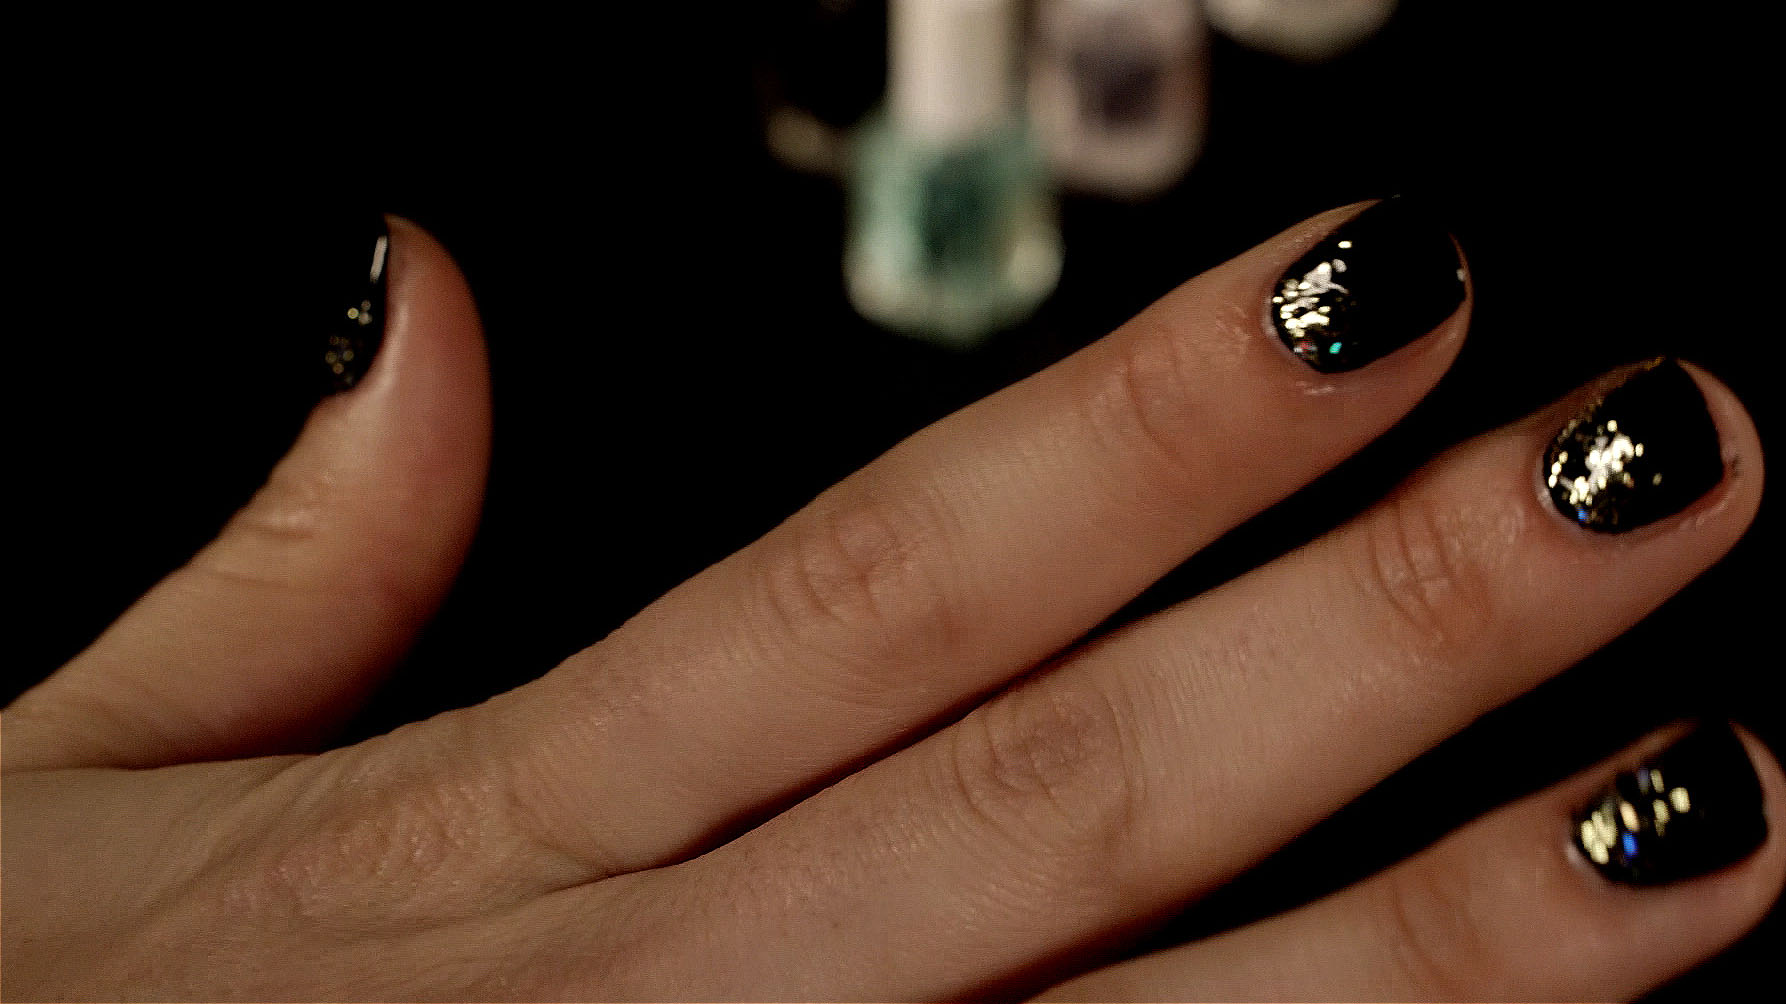 4. "Sparkly New Year's Eve Nail Art Design" - wide 4